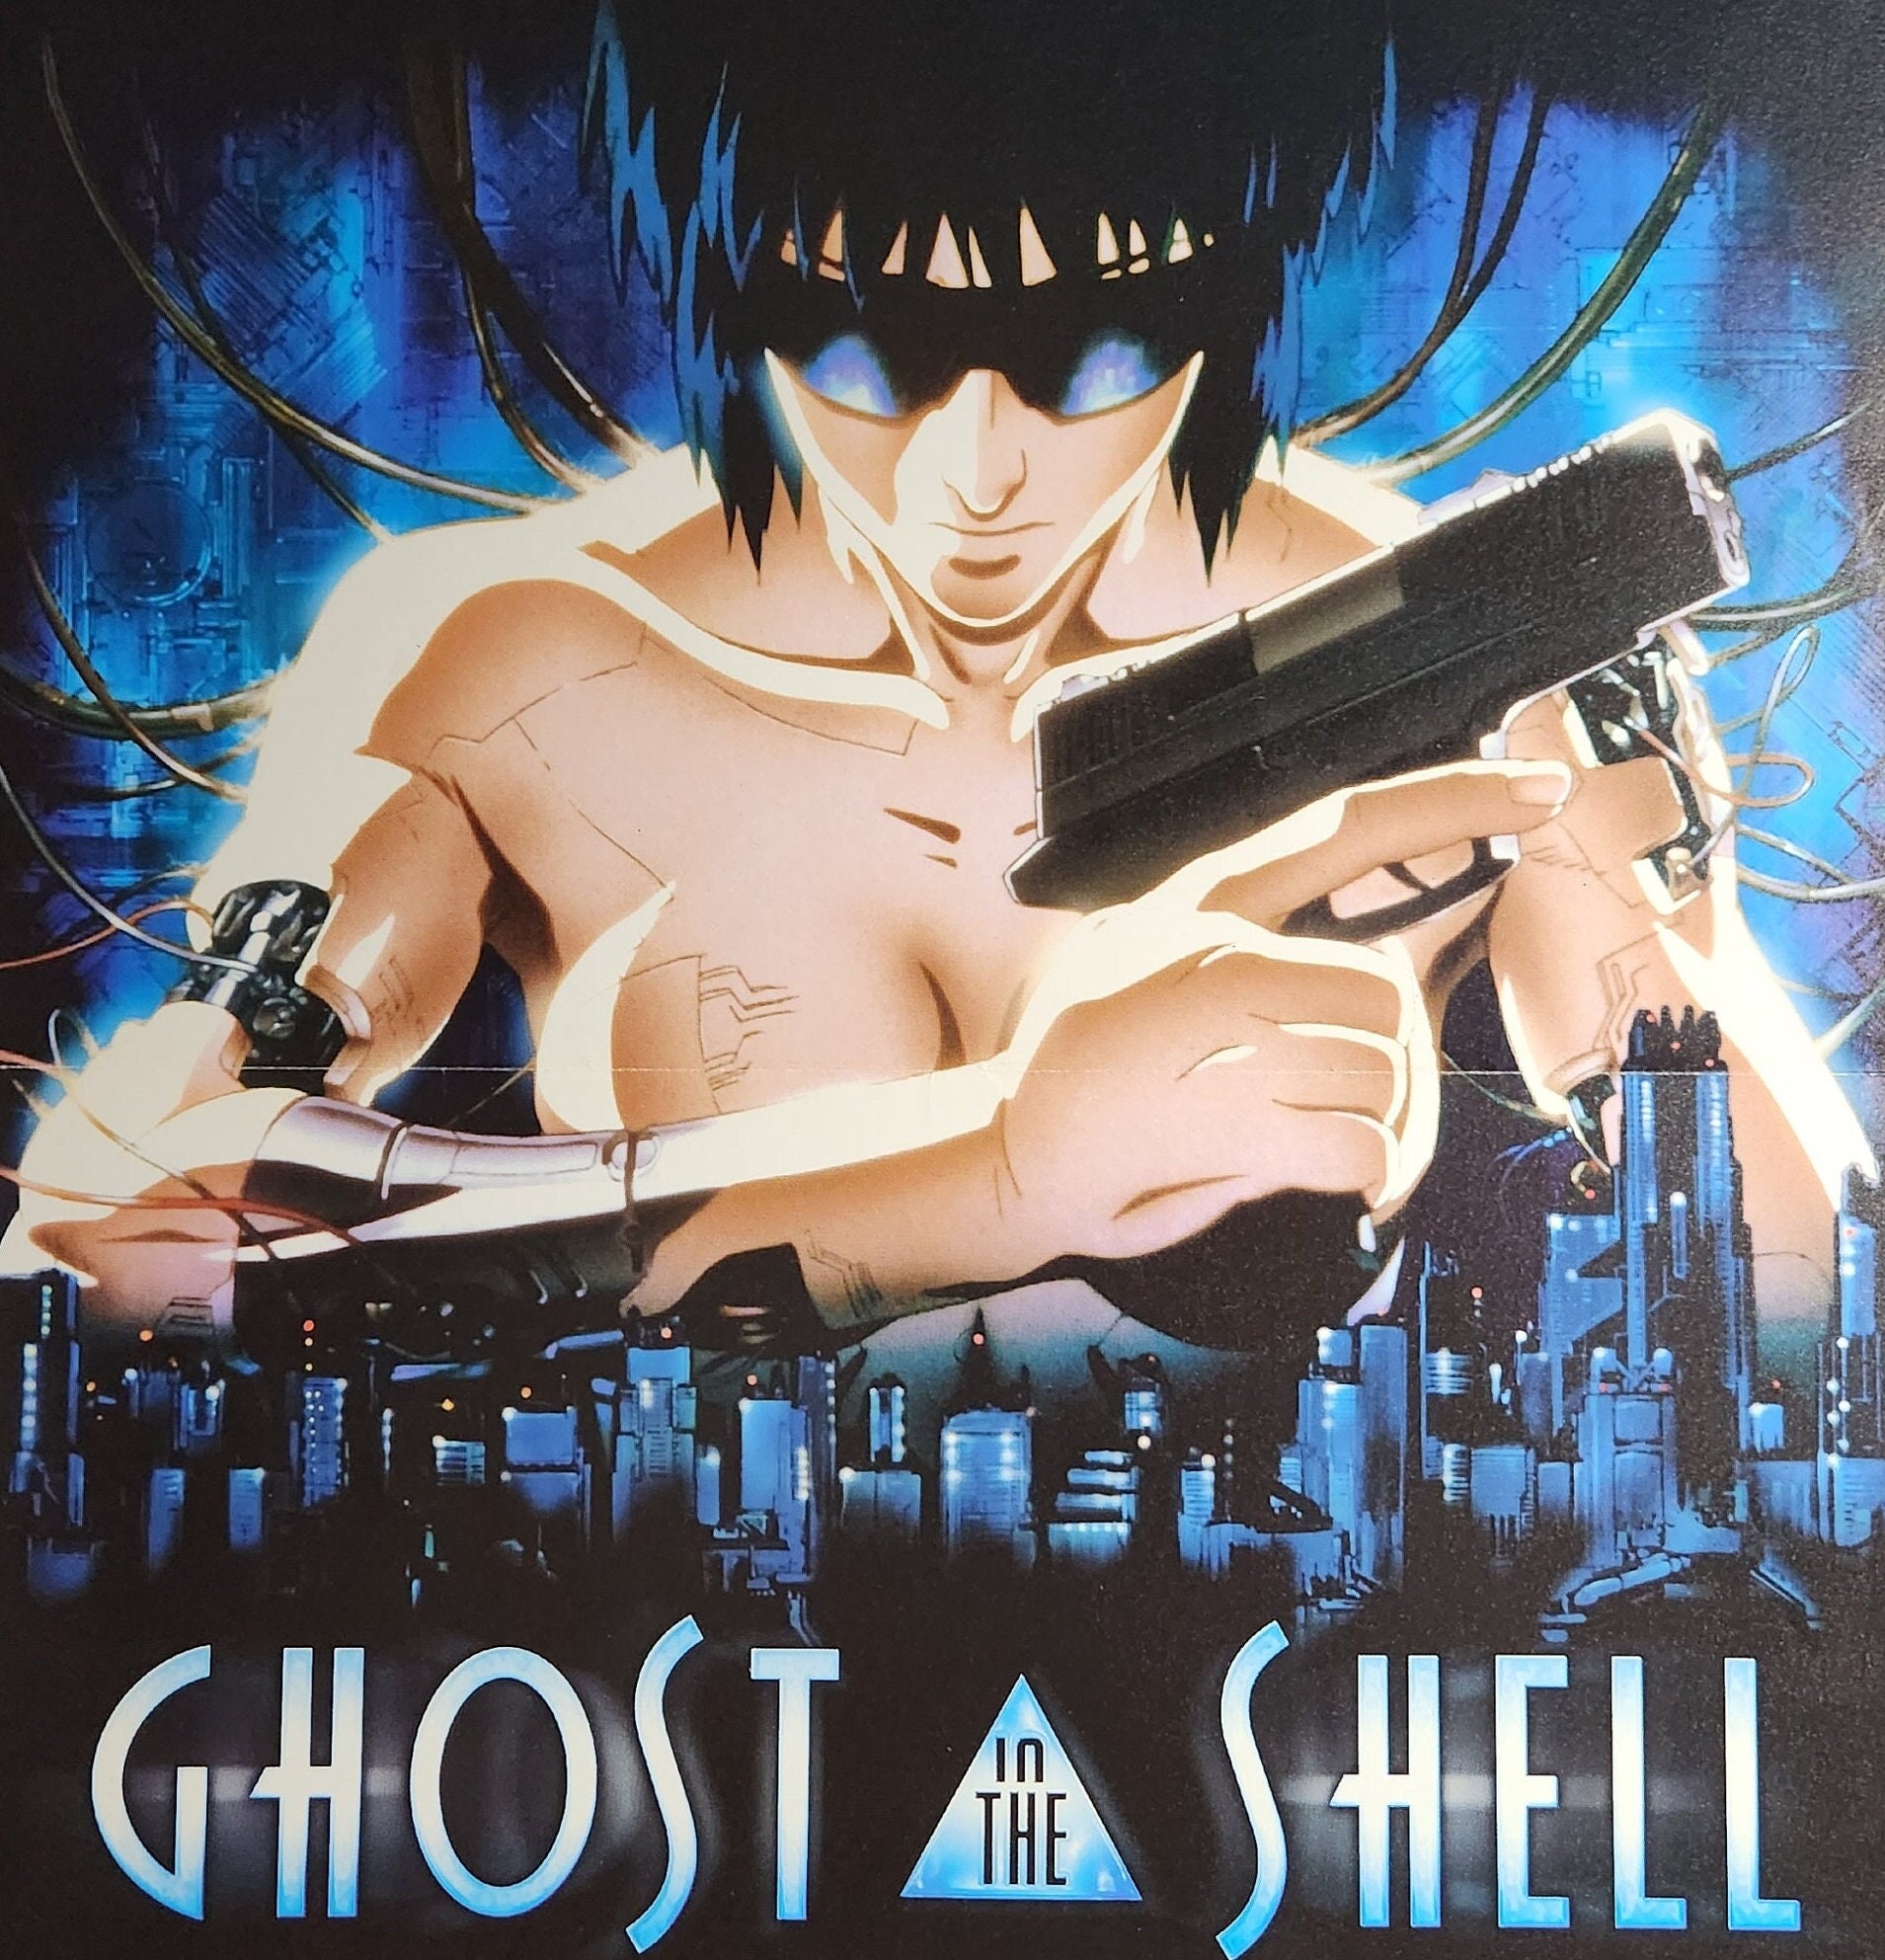 shellshock live' Poster, picture, metal print, paint by boothcal